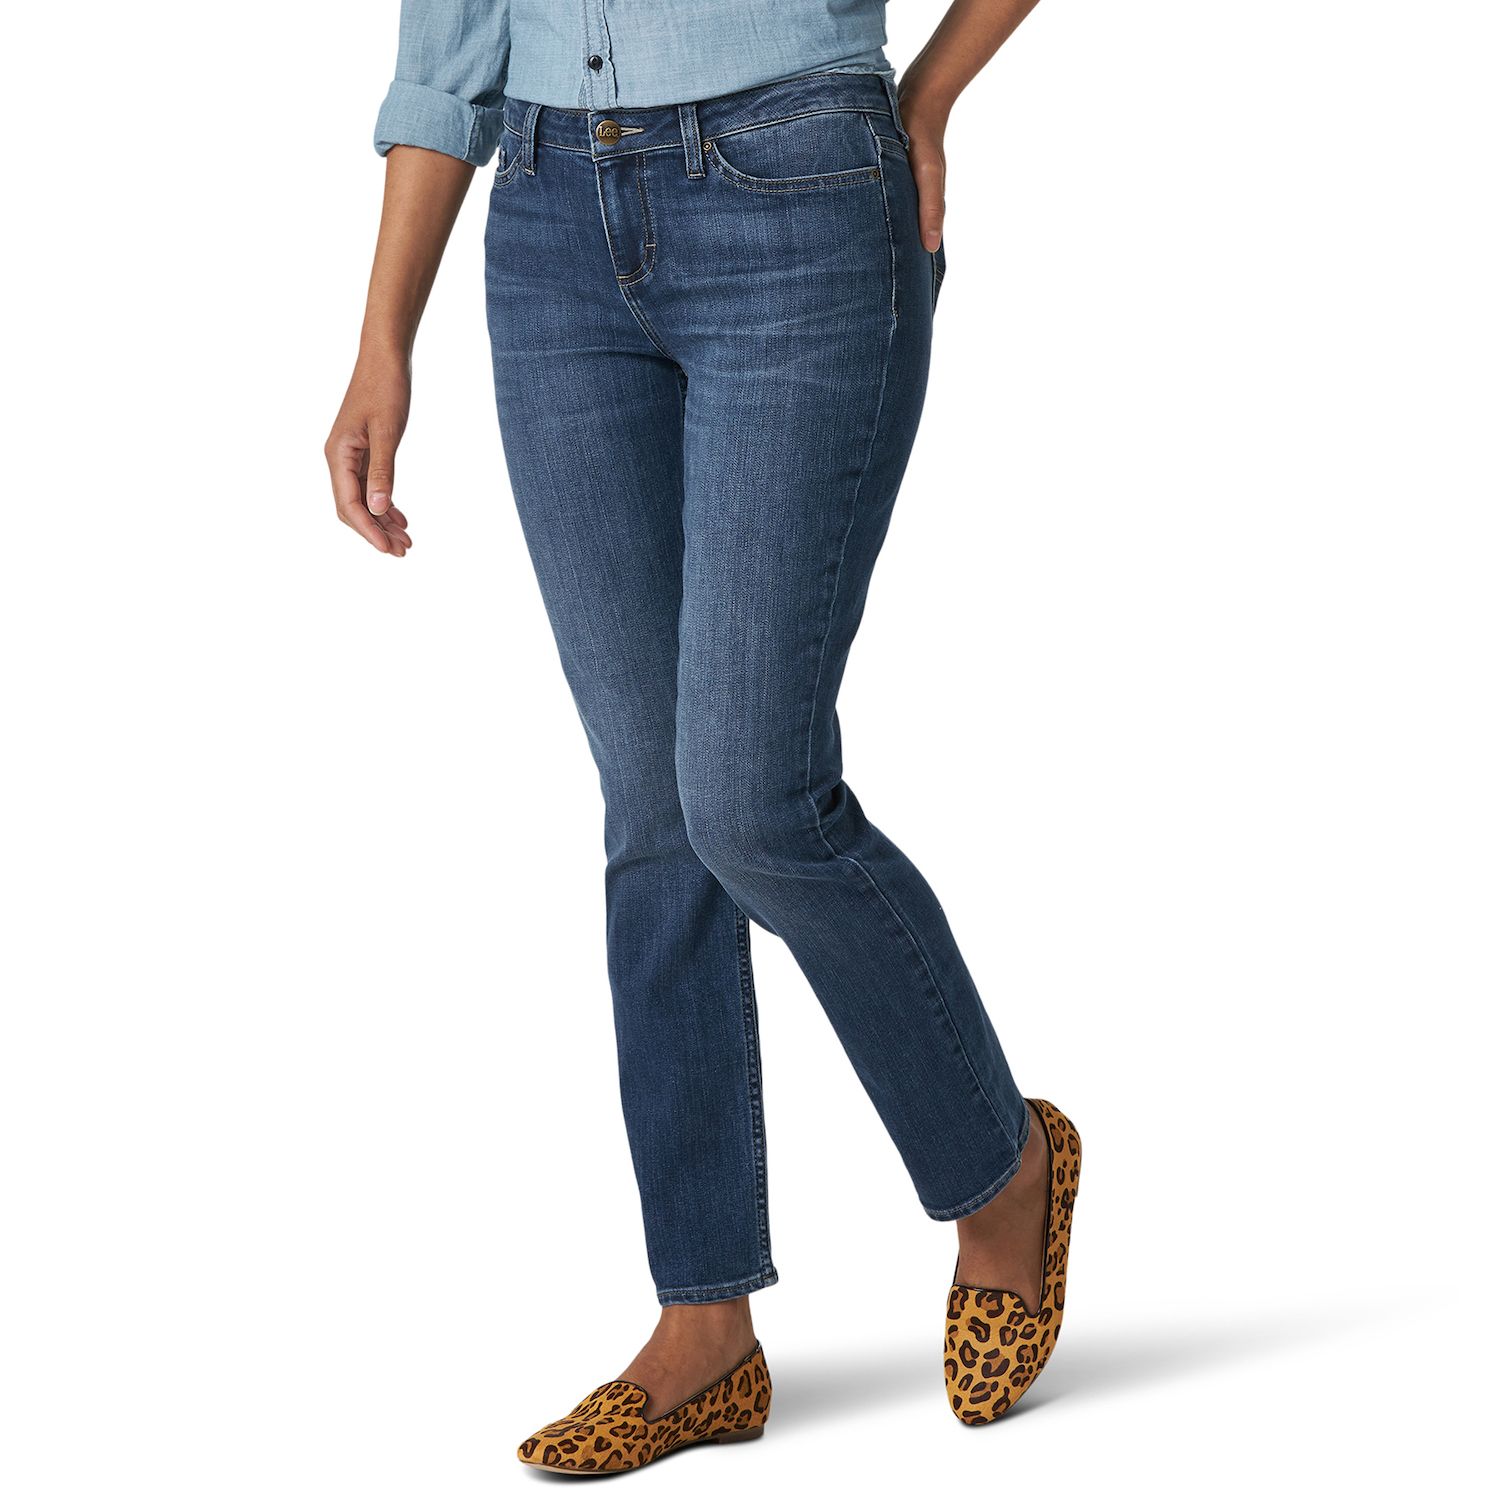 women's relaxed fit skinny jeans